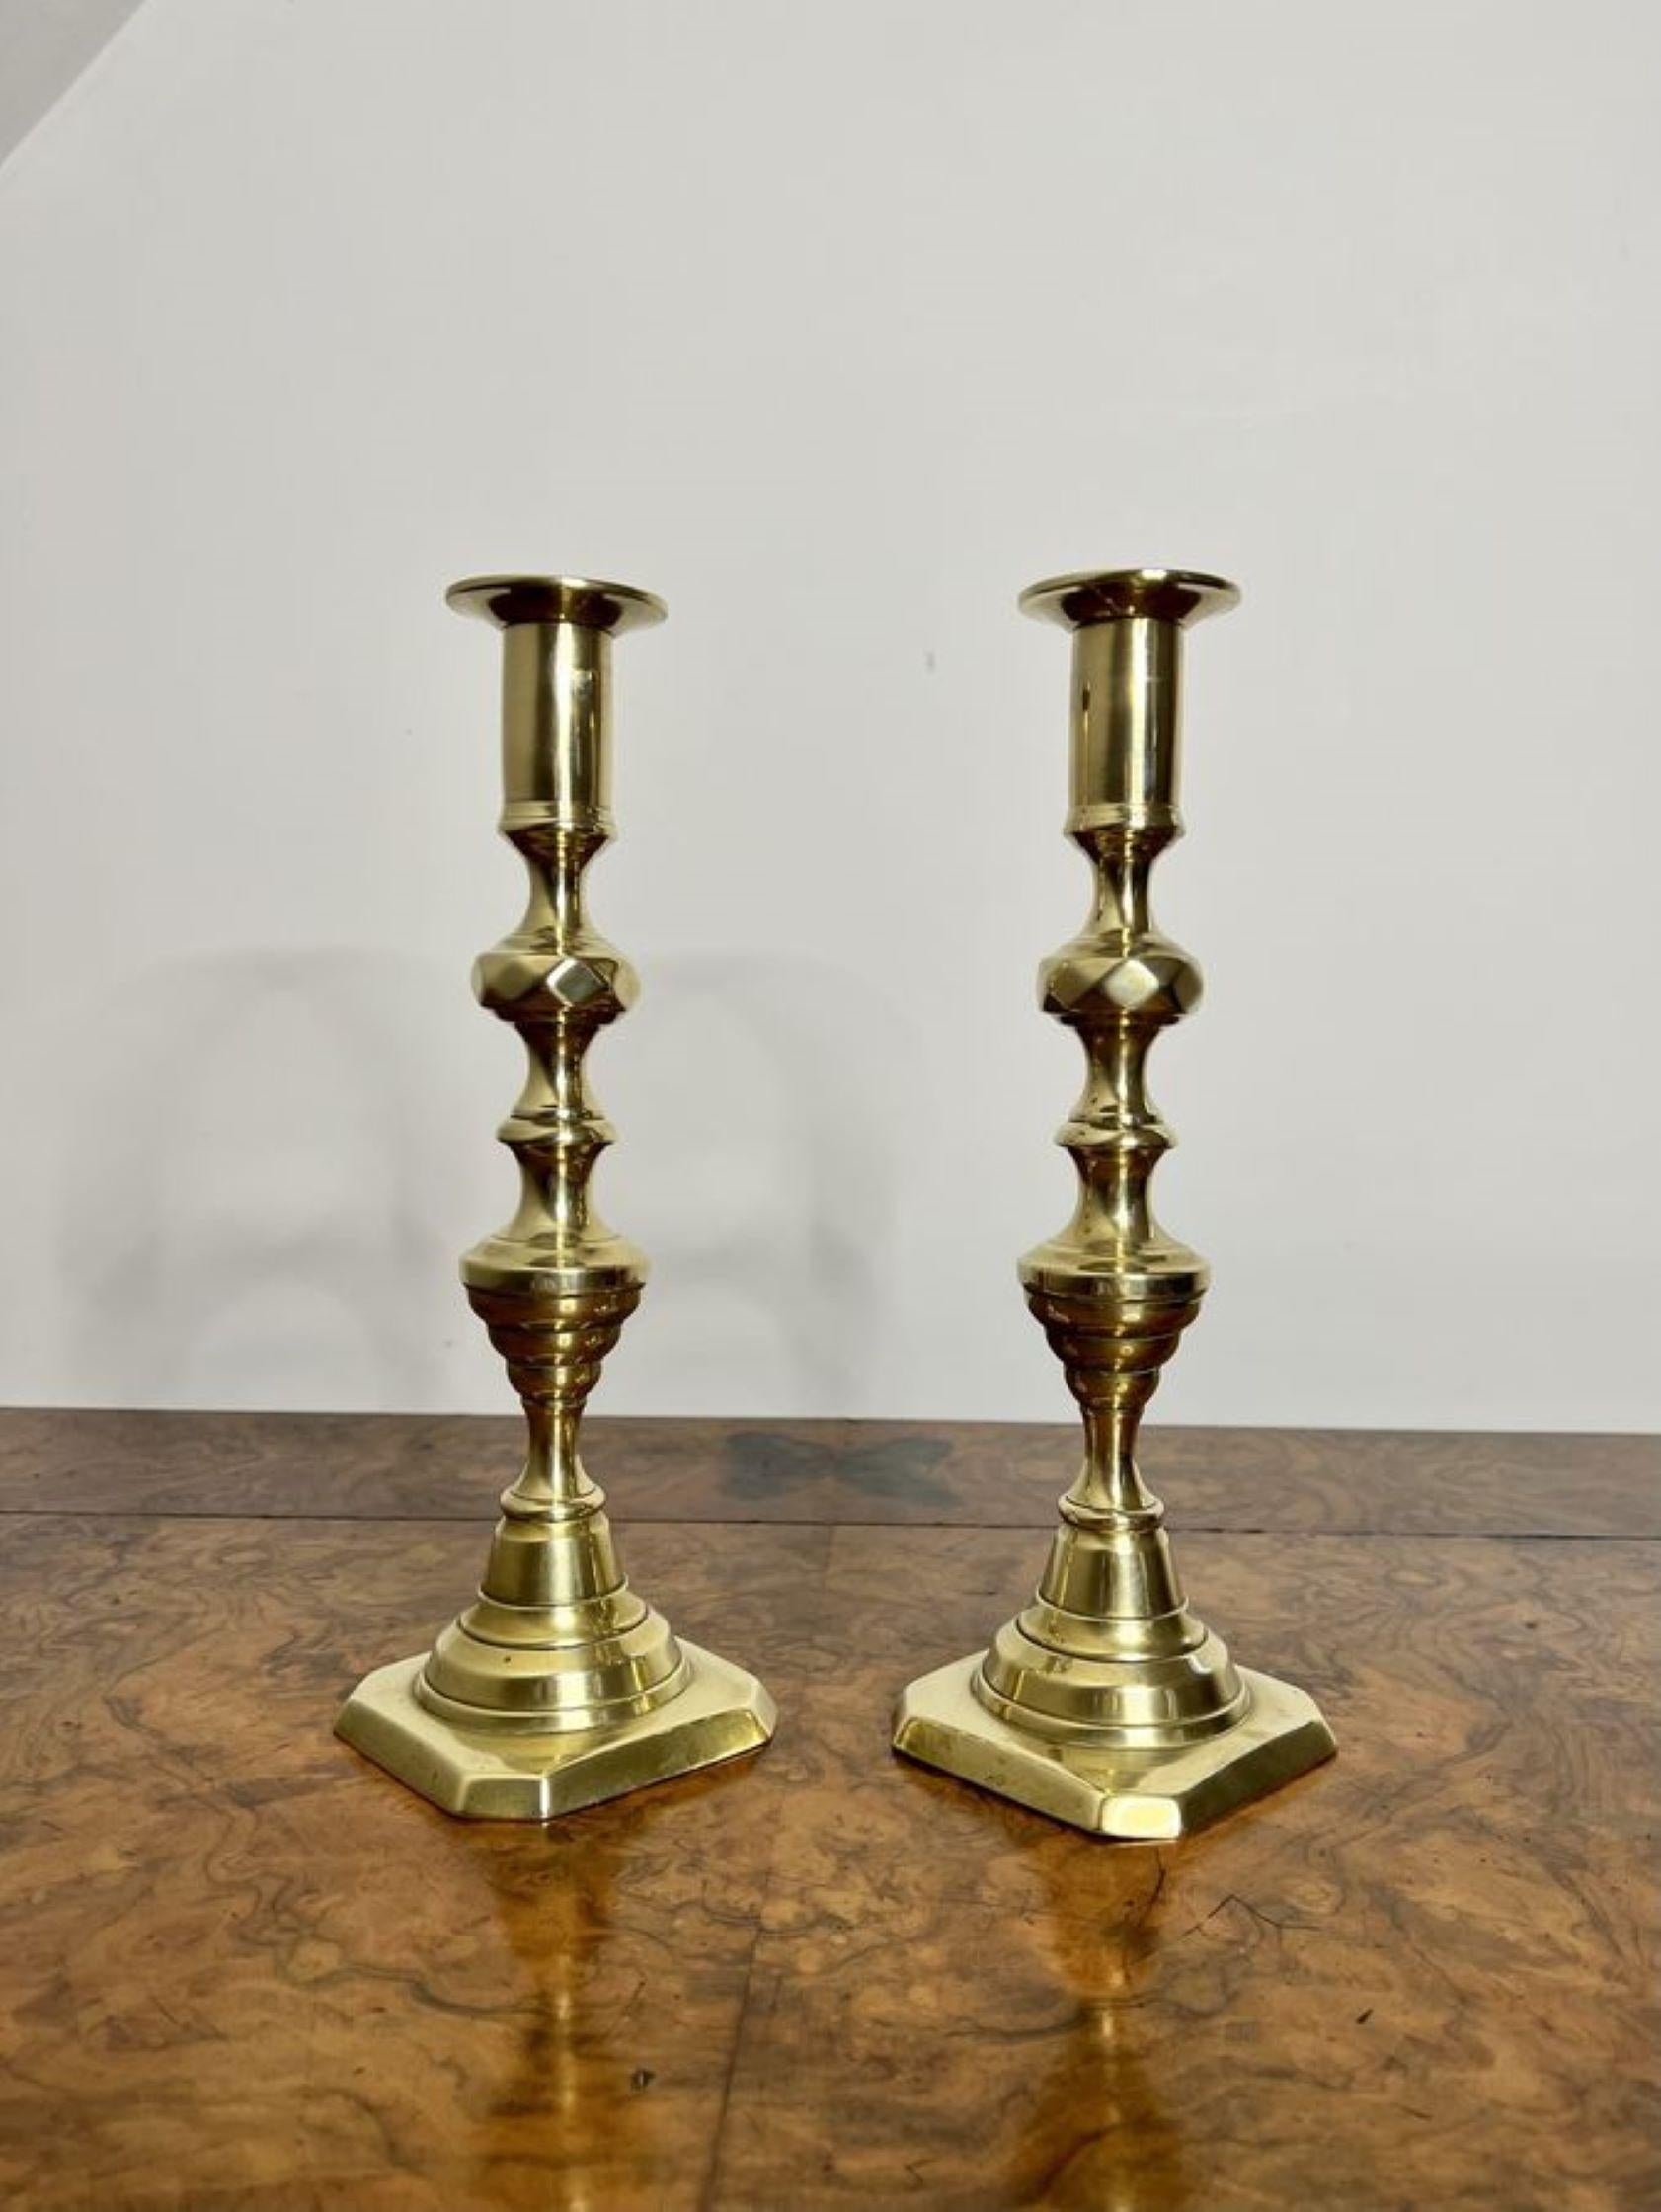 Lovely pair of antique Victorian brass candlesticks having a pair of antique Victorian brass candlesticks with a turned shaped column on a stepped base.

D. 1860
